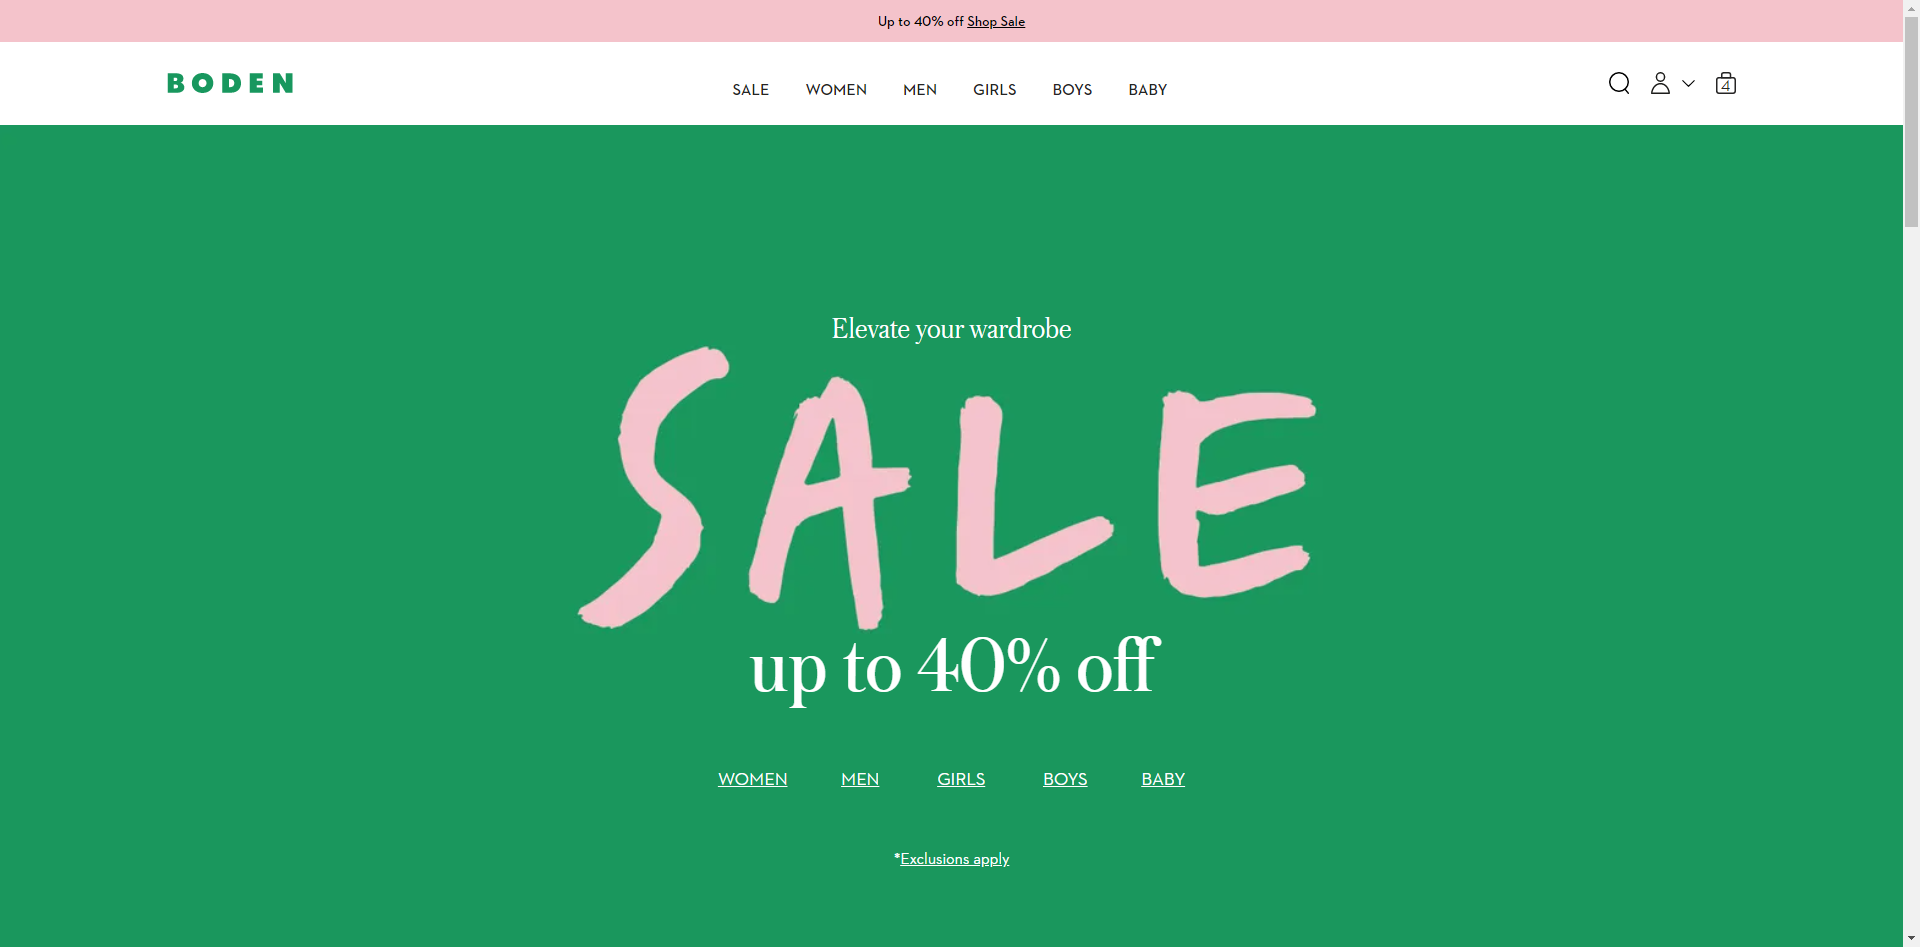 Boden Clothing up to 40% off sale and free delivery for order over $200